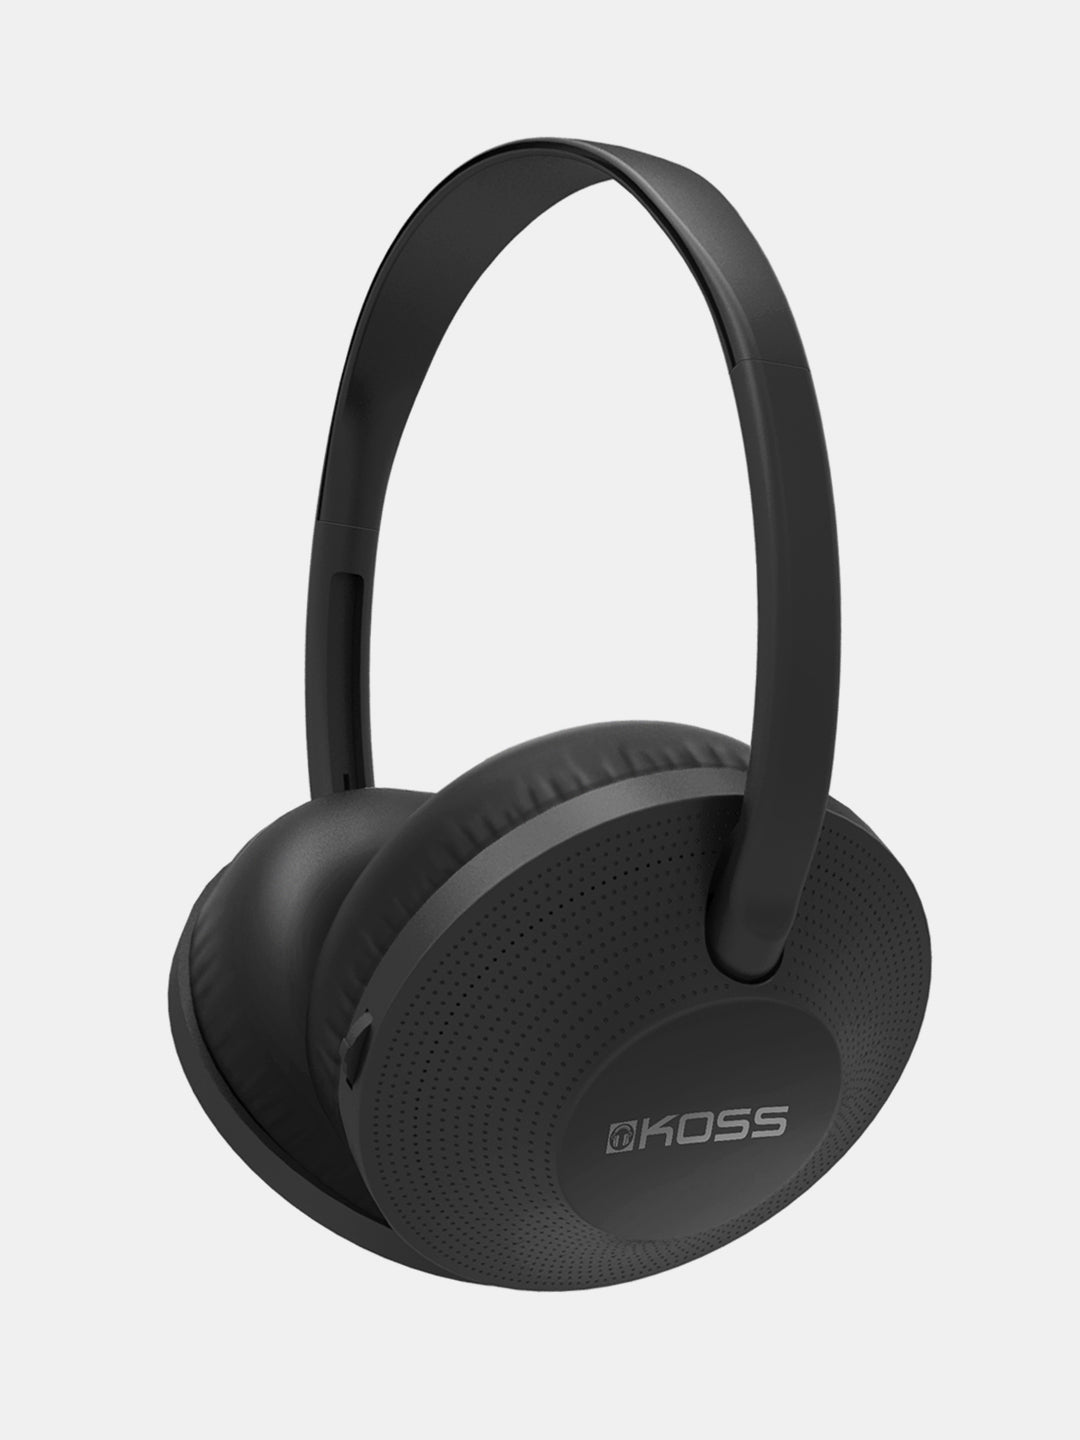 Frequently seen koss porta pro headphone review by influ pinterest🎧✨, Gallery posted by Primikono🫀